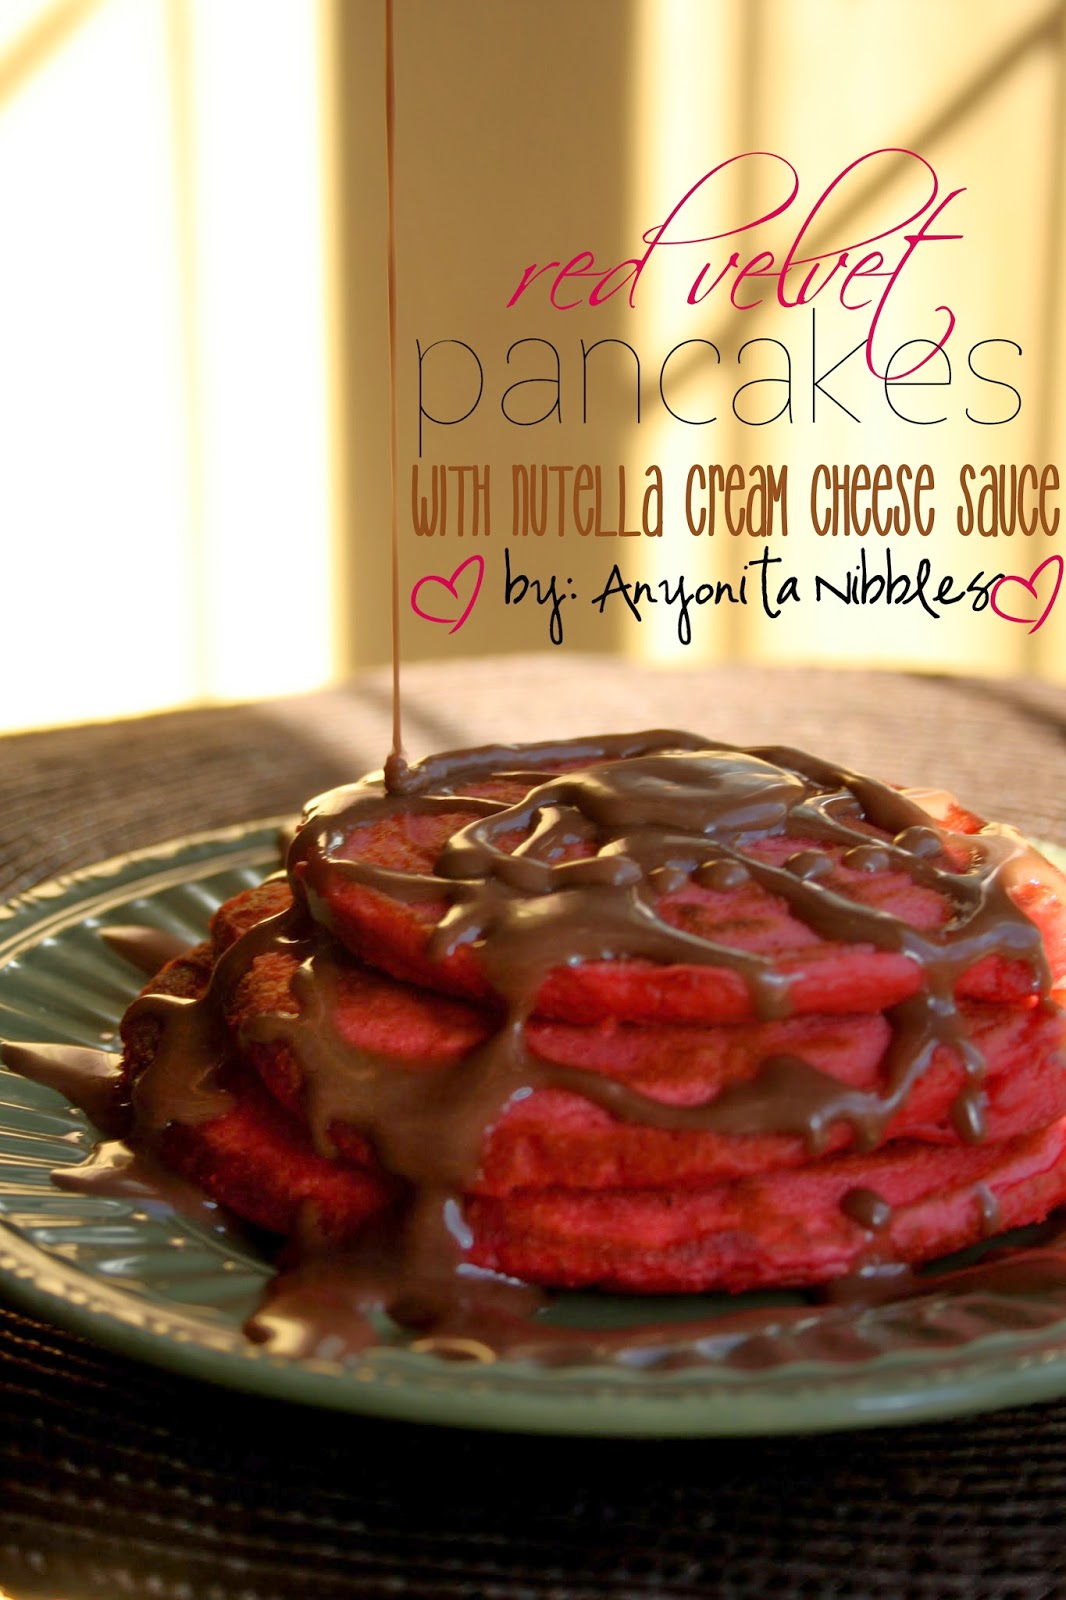 Red Velvet Panckes with Nutella Cream Cheese Sauce from Anyonita-nibbles.co.uk